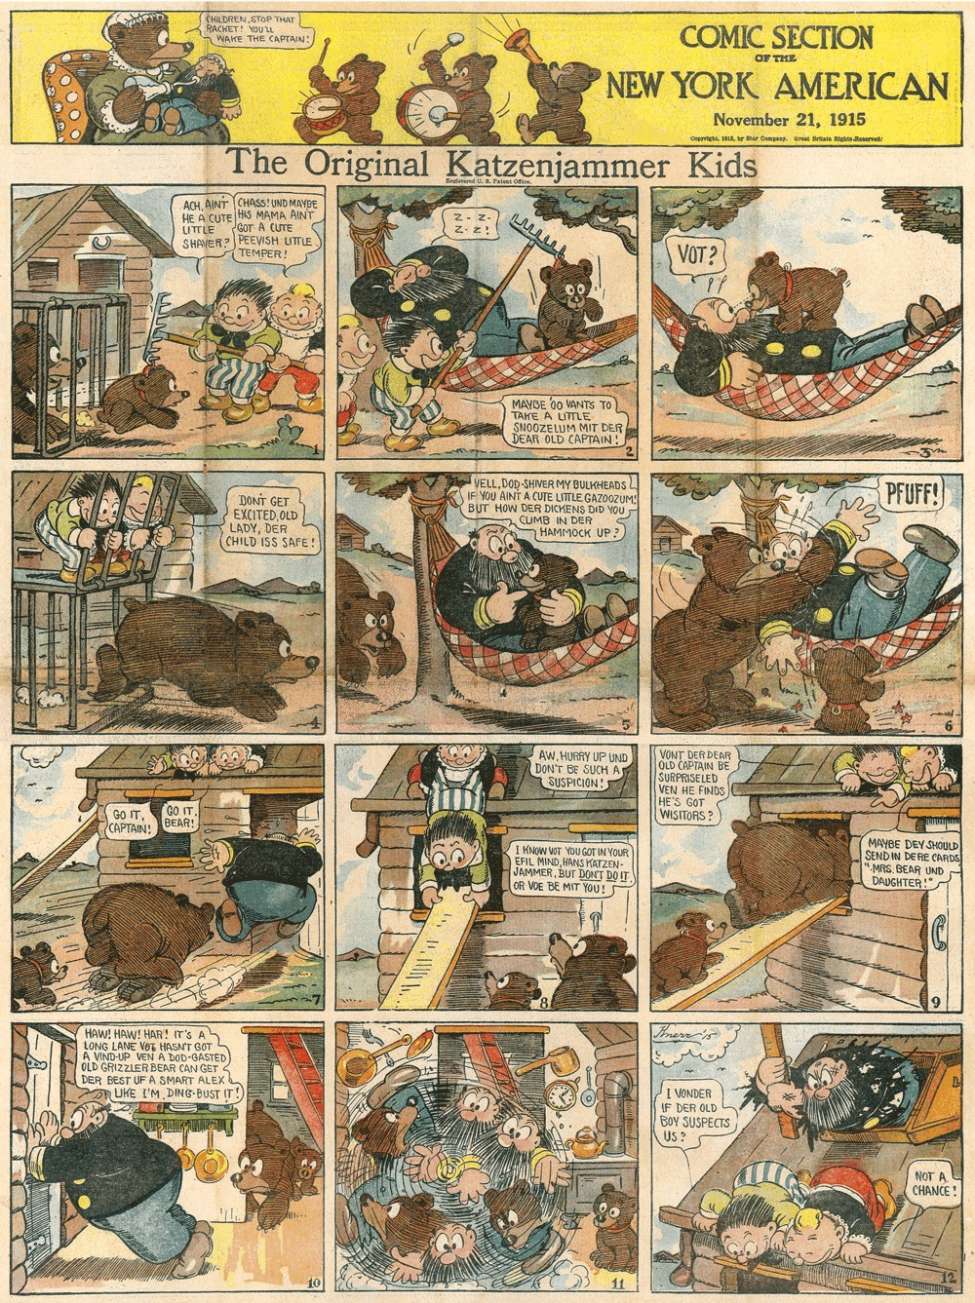 Comic Book Cover For New York American - Comic Section (1915-11-21)